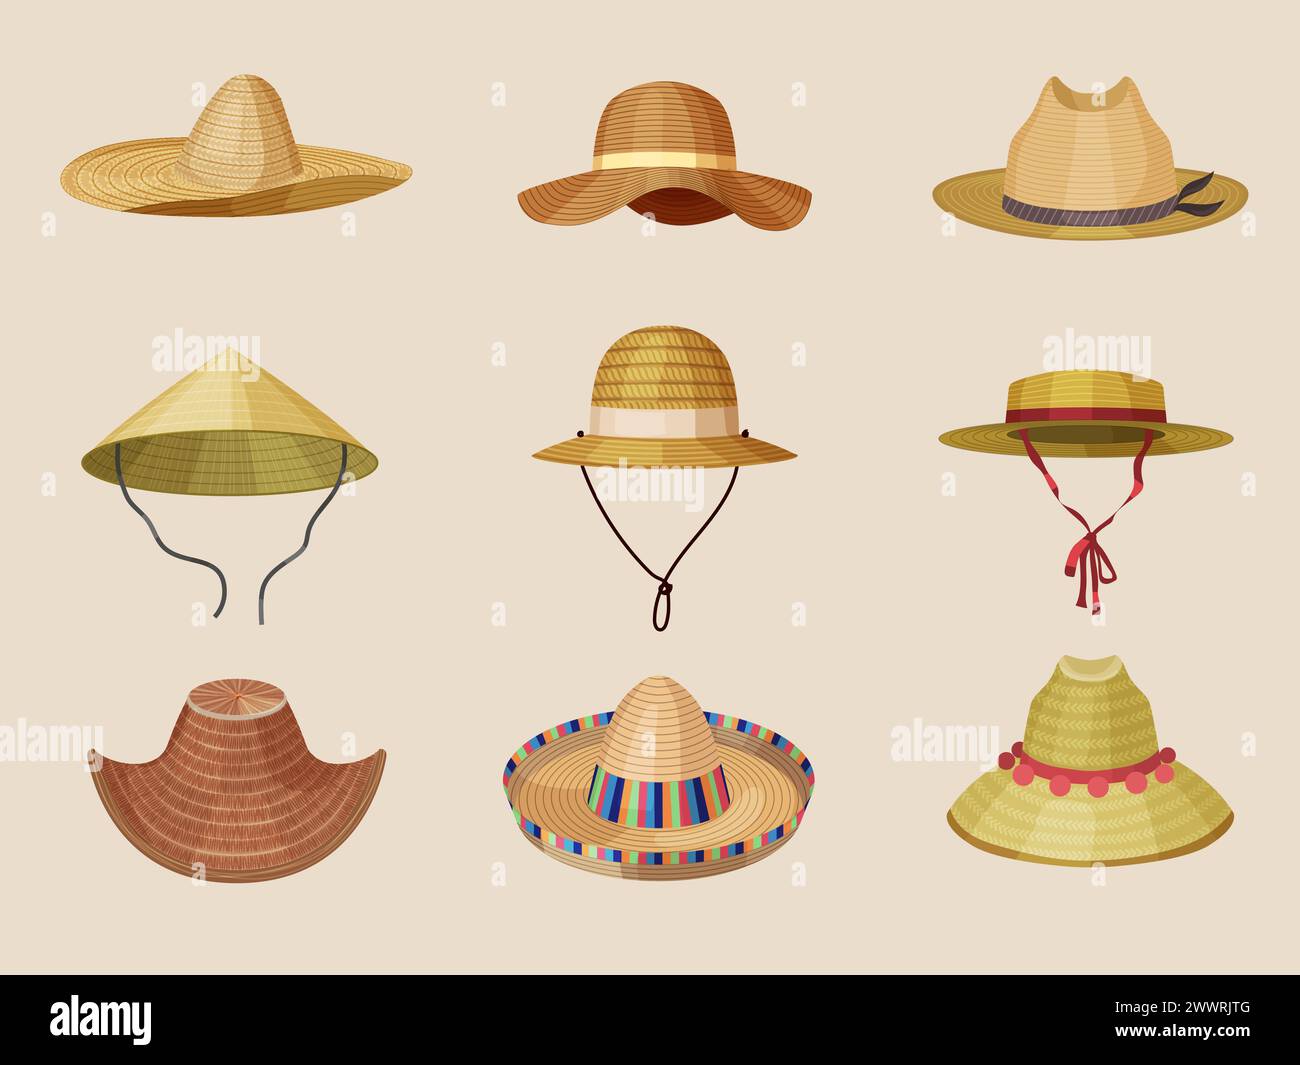 Straw hats. Different fashioned head protection from sun panama farmer headwear cowboy hat recent vector cartoon pictures Stock Vector